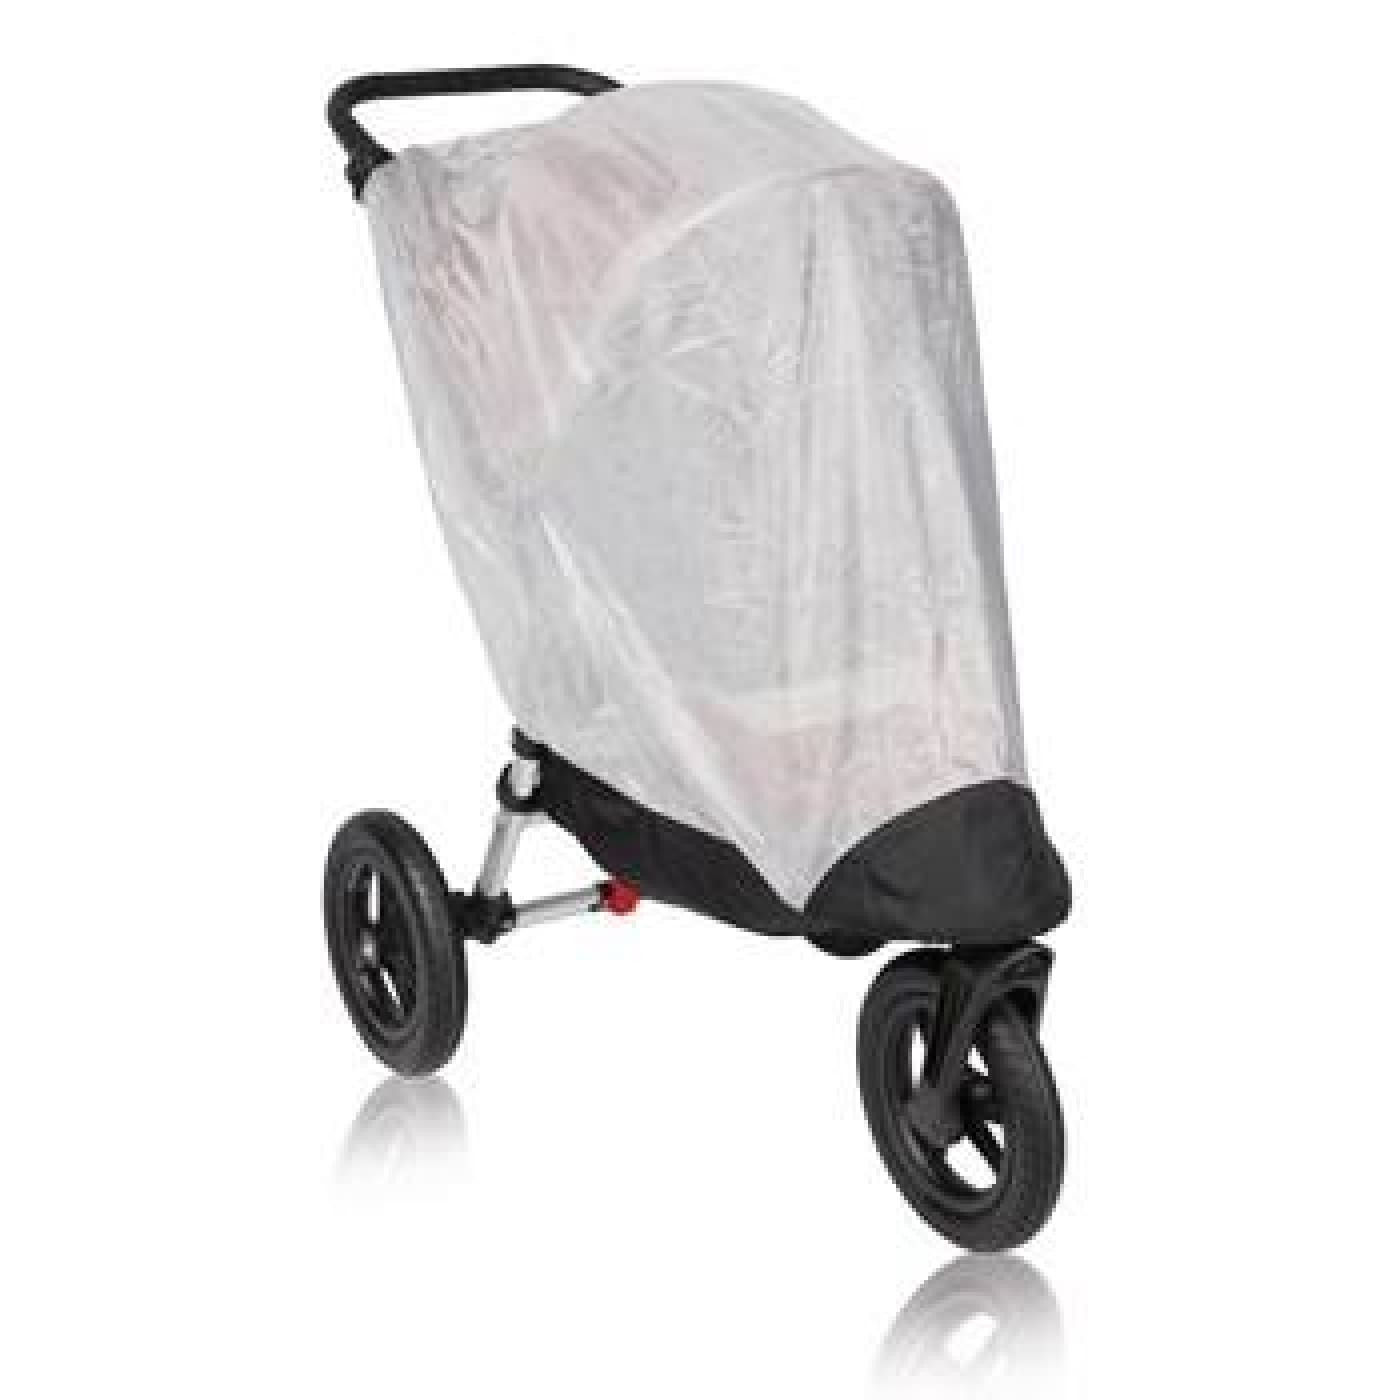 Baby Jogger City Elite Bug Cover - PRAMS & STROLLERS - SUN COVERS/WEATHER SHIELDS